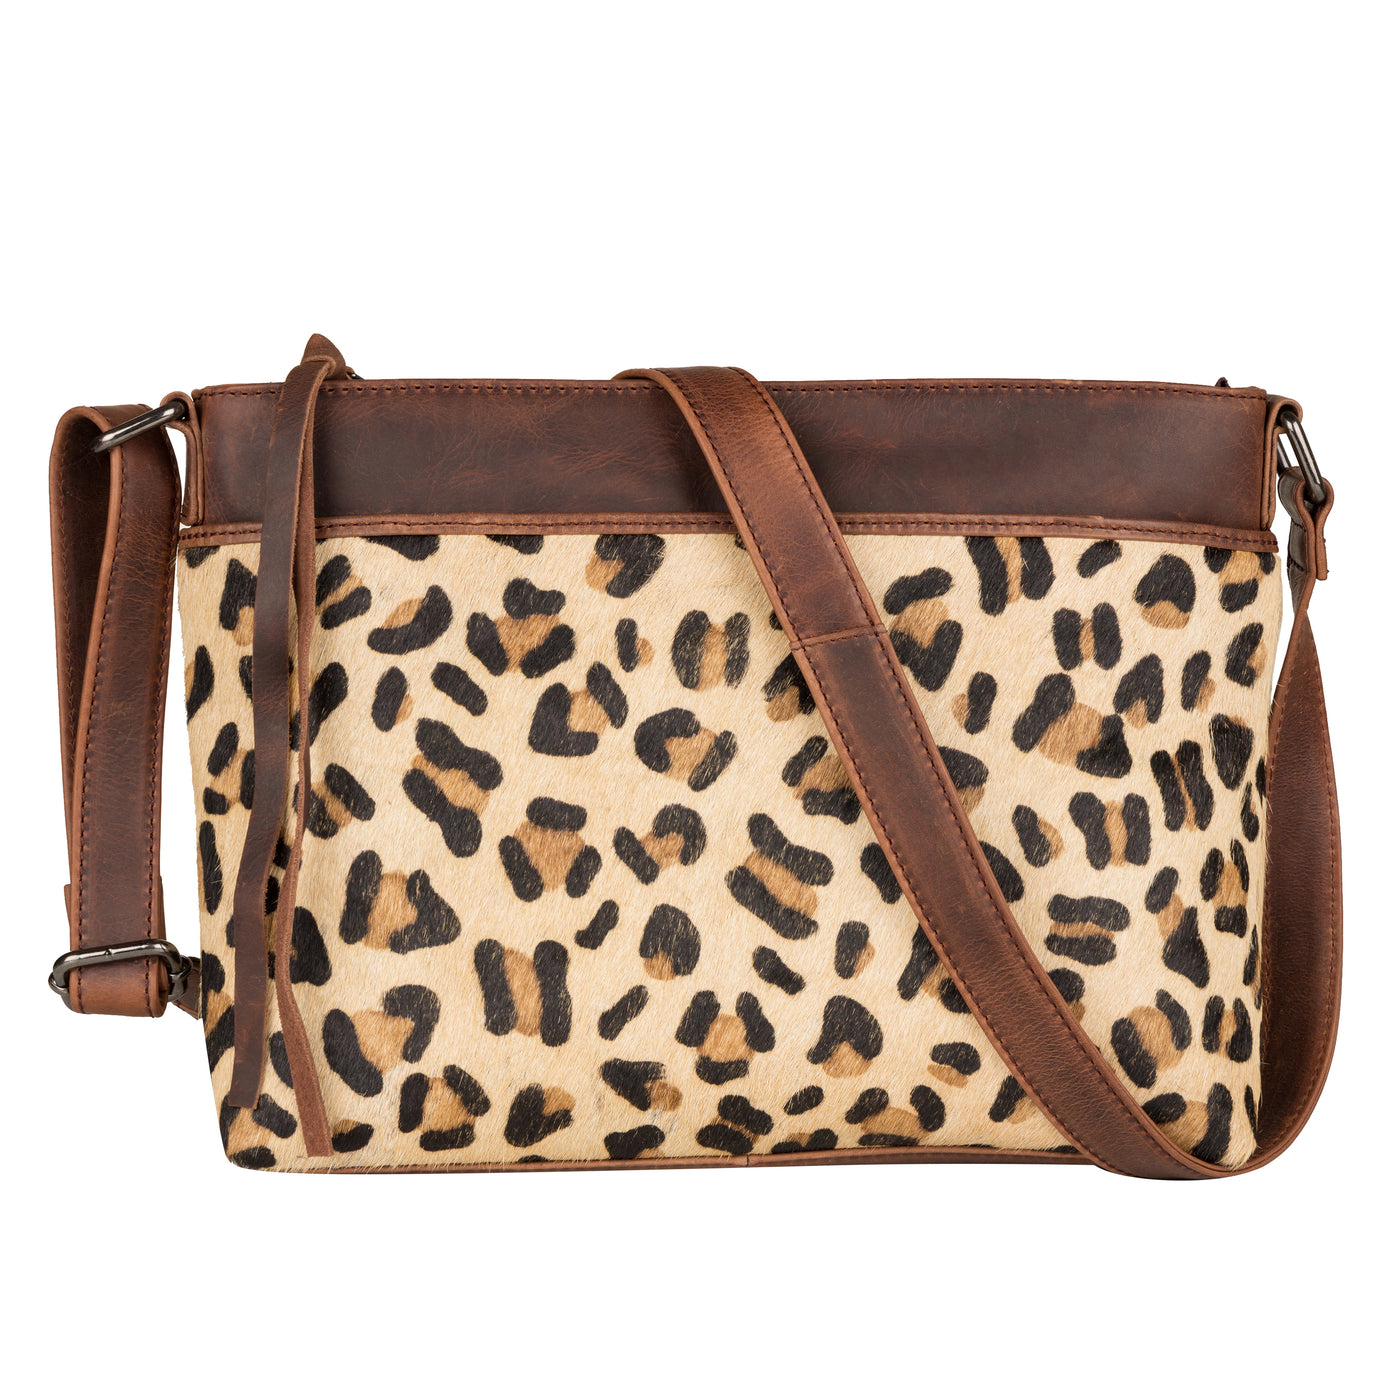 Concealed Carry Josie Leather Hair -On Indian Leopard Crossbody - Lady Conceal - Concealed Carry Purse - soft leather shoulder bags for women's - crossbody bags for everyday use - most popular crossbody bag - crossbody bags for guns - crossbody handgun bag - Unique Hide Purse - Conceal Carry Western Purse - Stylish Carry Josie Leather Bag - Bag for Conceal Carrying Women - Gun Bag for Women